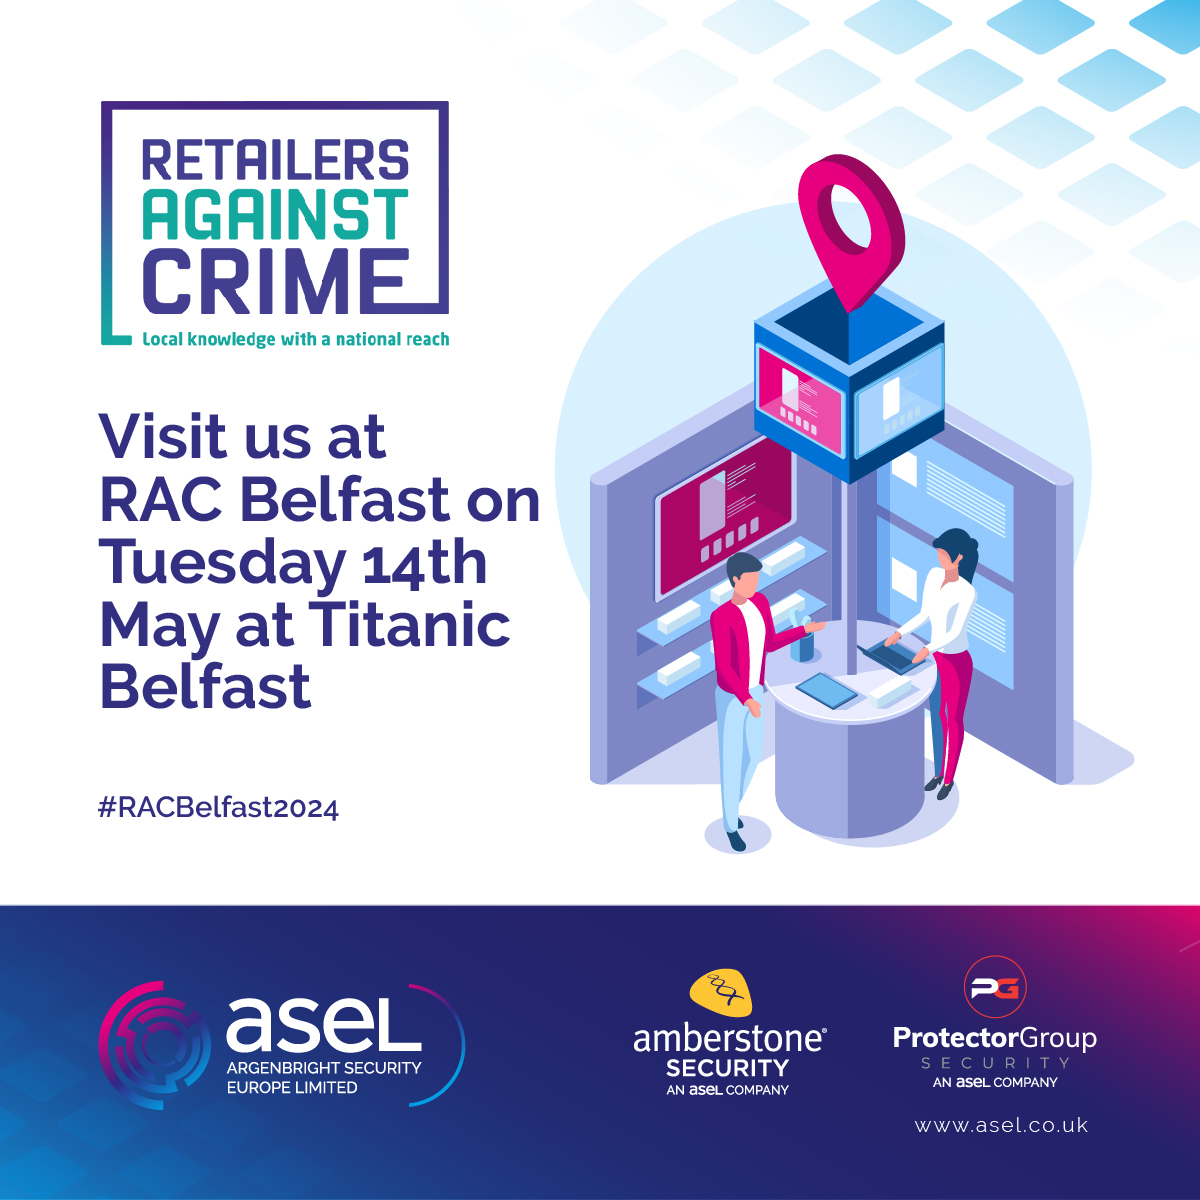 We're going to be in Northern Ireland next week, exhibiting at the Retailers Against Crime Conference in Belfast on Tuesday 14th May. 

If you'd like to arrange a meeting with the team at the Retailers Against Crime event, please email enquiries@asel.co.uk

#retailcrime #security